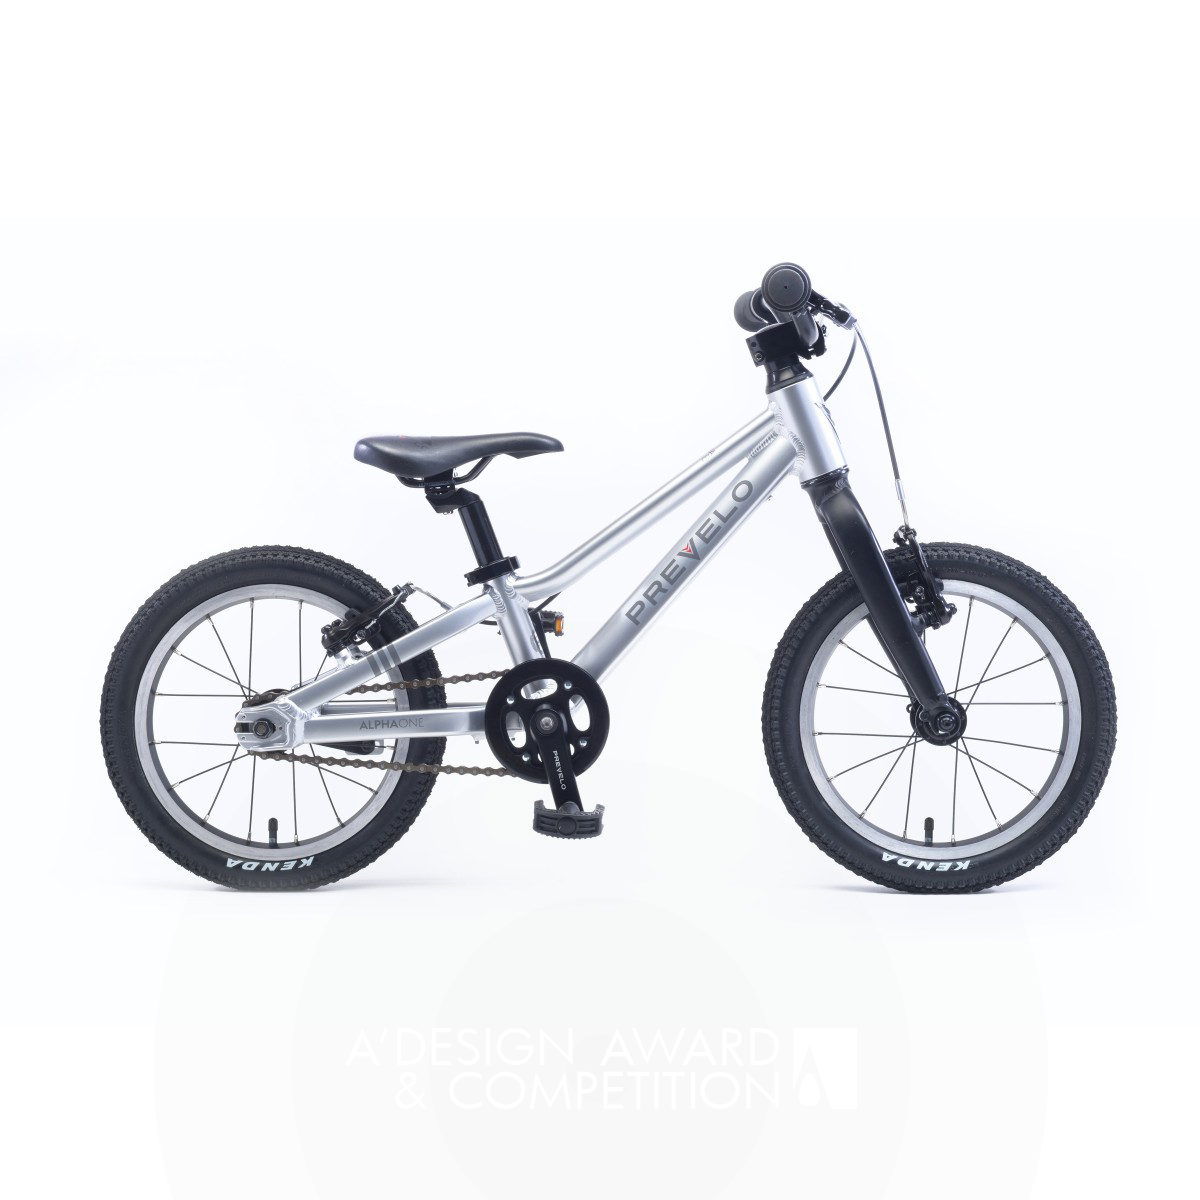 Prevelo Alpha One Bicycle for Children by Prevelo Bikes